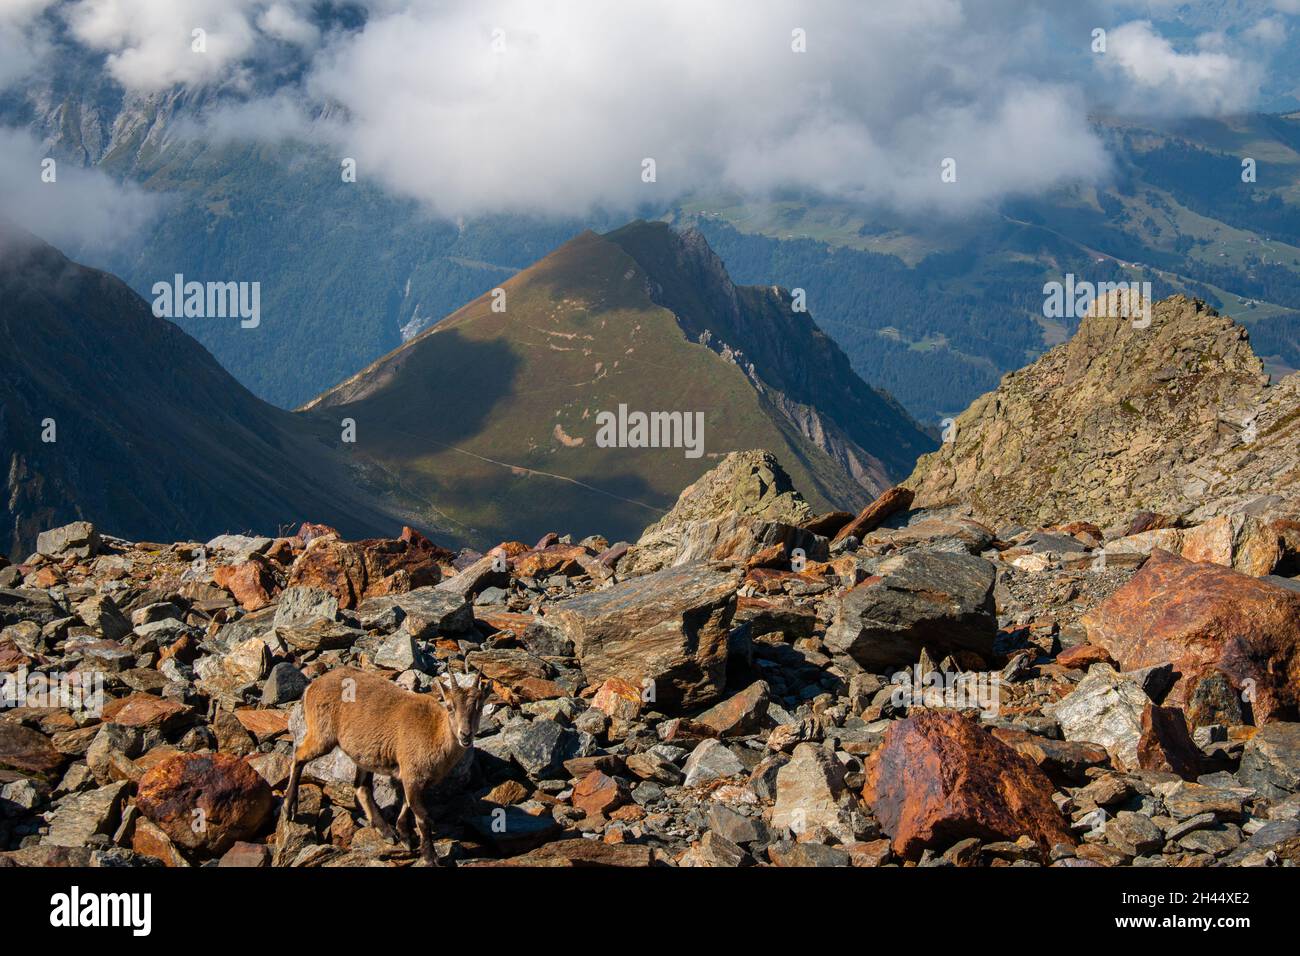 A goat in French Alps blending in with the rocks around it, a hiking trail between Nid d'Aigle and Refuge de Tete Rousse, September, France Stock Photo